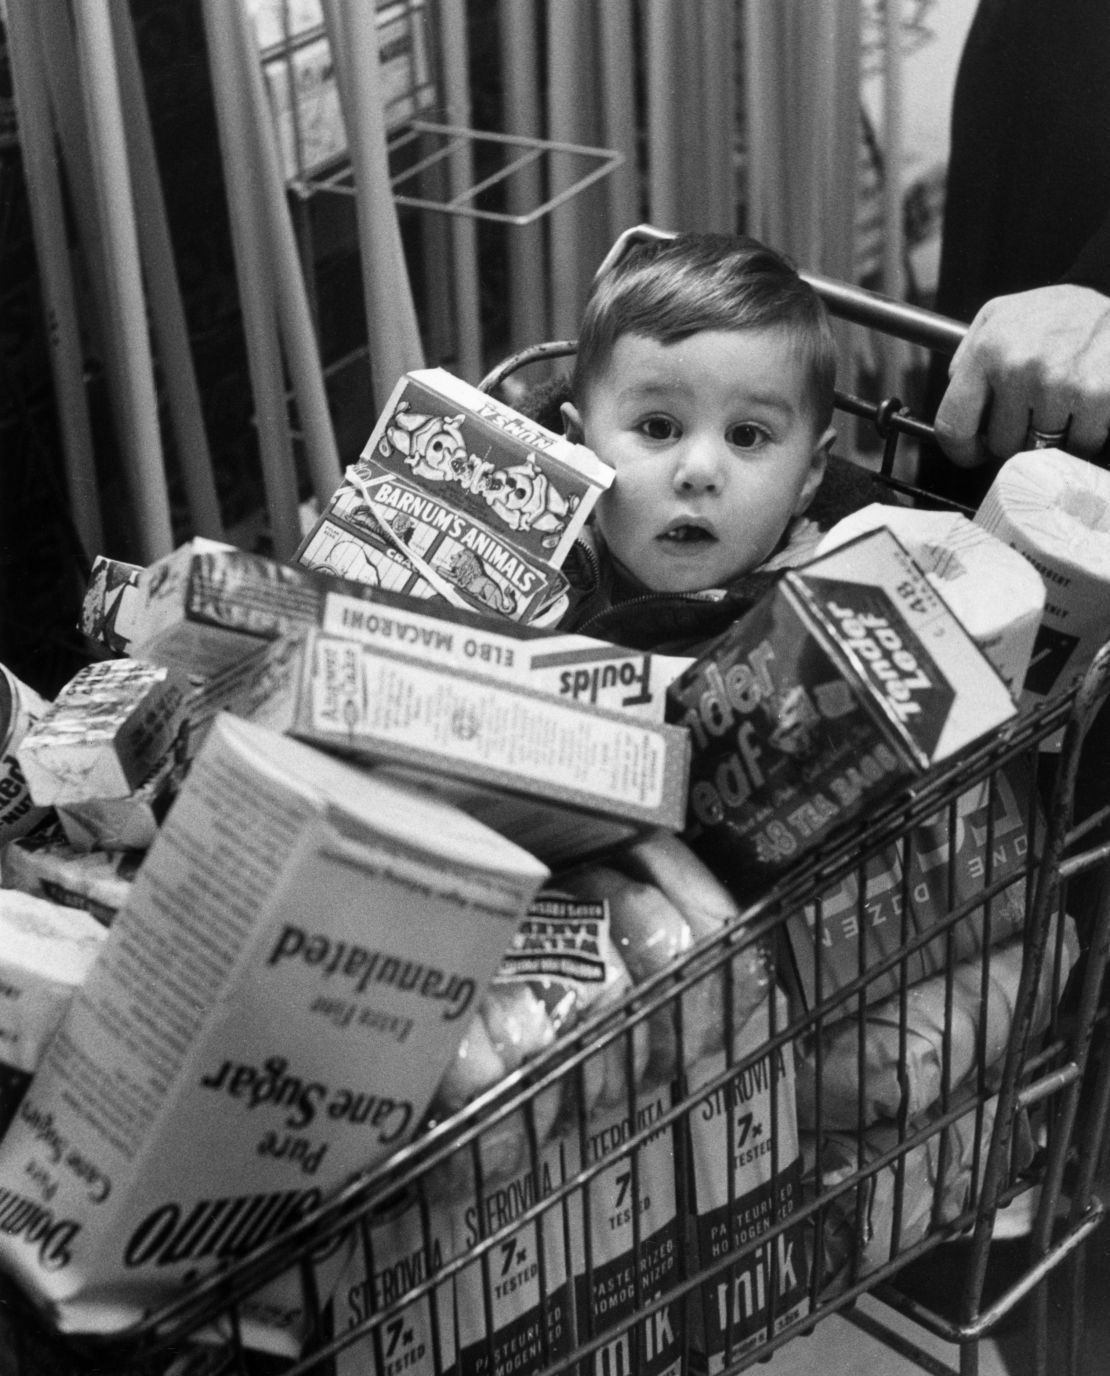 Kid in a grocery cart circa 1950. There were an average of 14,000 stock-keeping units, or products, in US grocery stores in 1980; 51,000 in 2008; and 33,055 in 2018, according to the Food Marketing Institute.